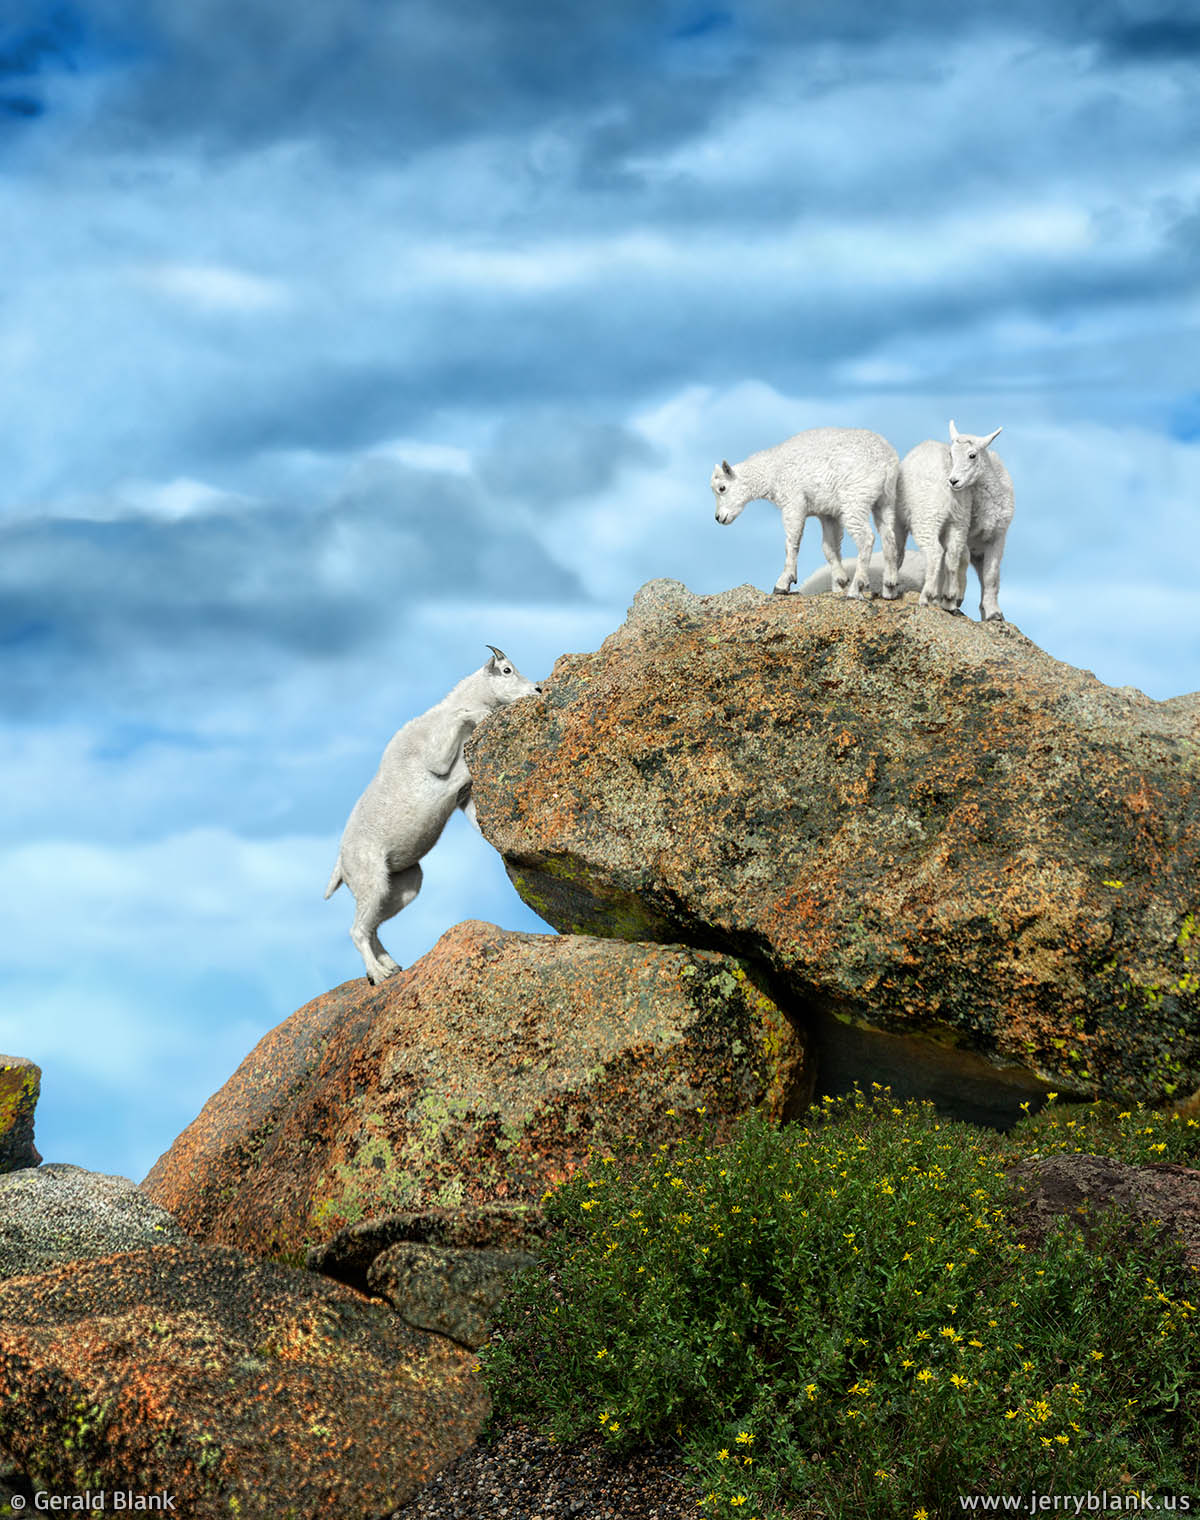 #20421 - A young mountain goat prepares to jump up to join some kids at Mount Evans, Colorado - photo by Jerry Blank